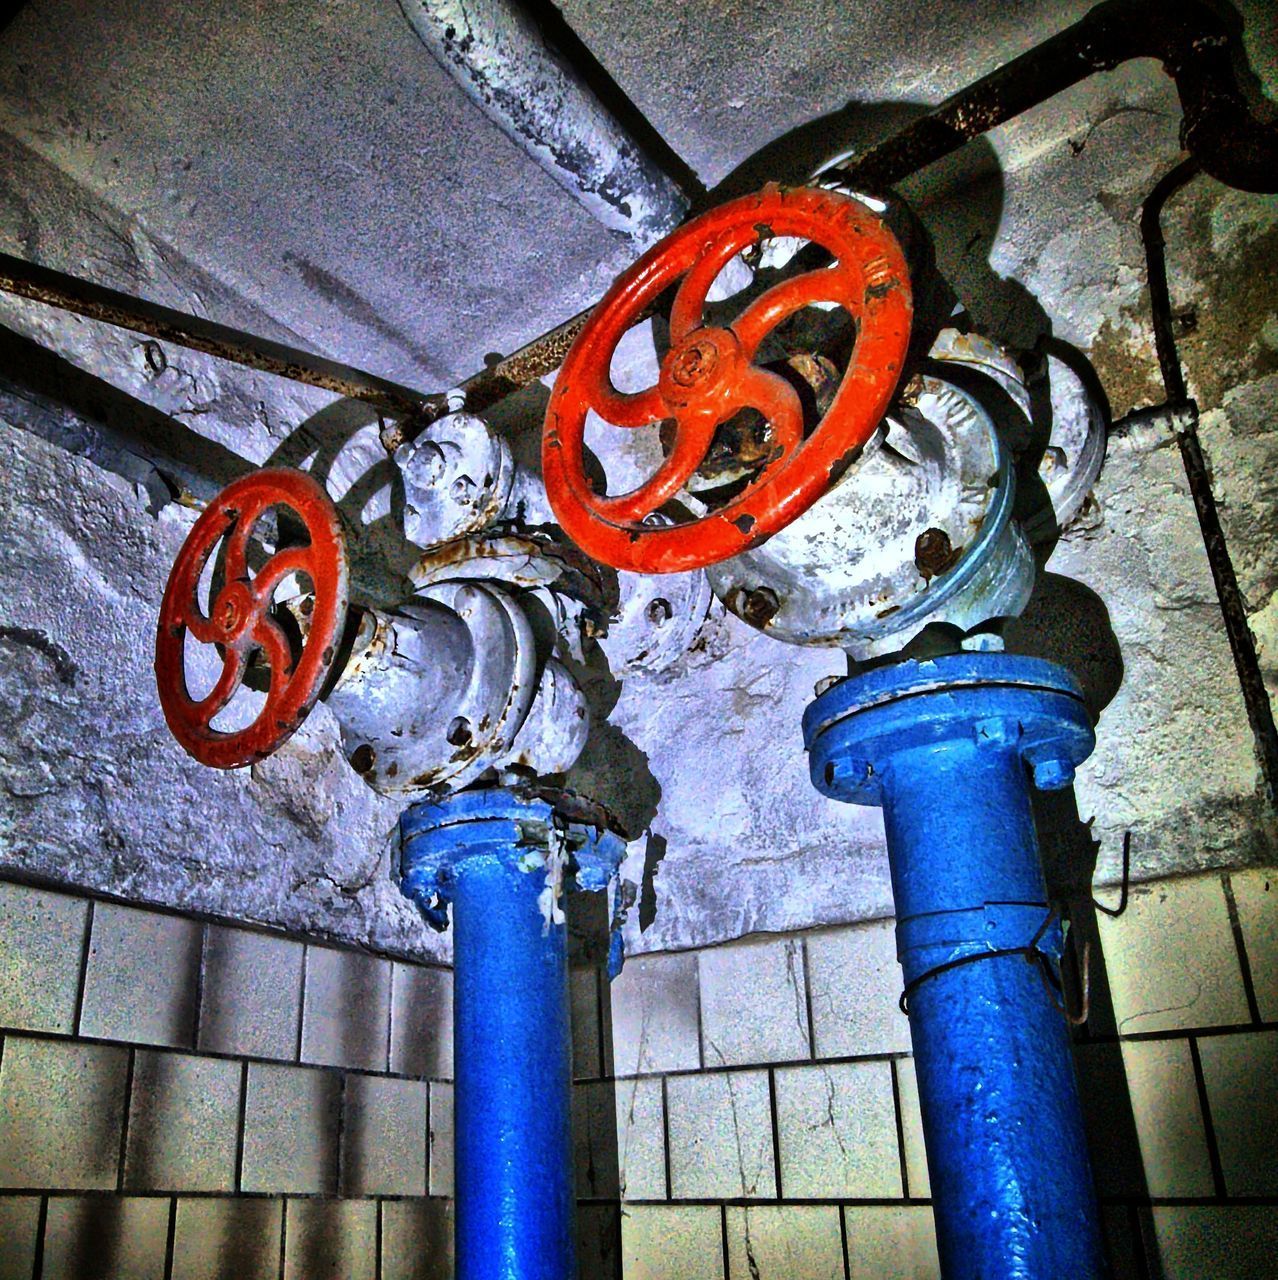 HIGH ANGLE VIEW OF PIPES ON METAL WALL